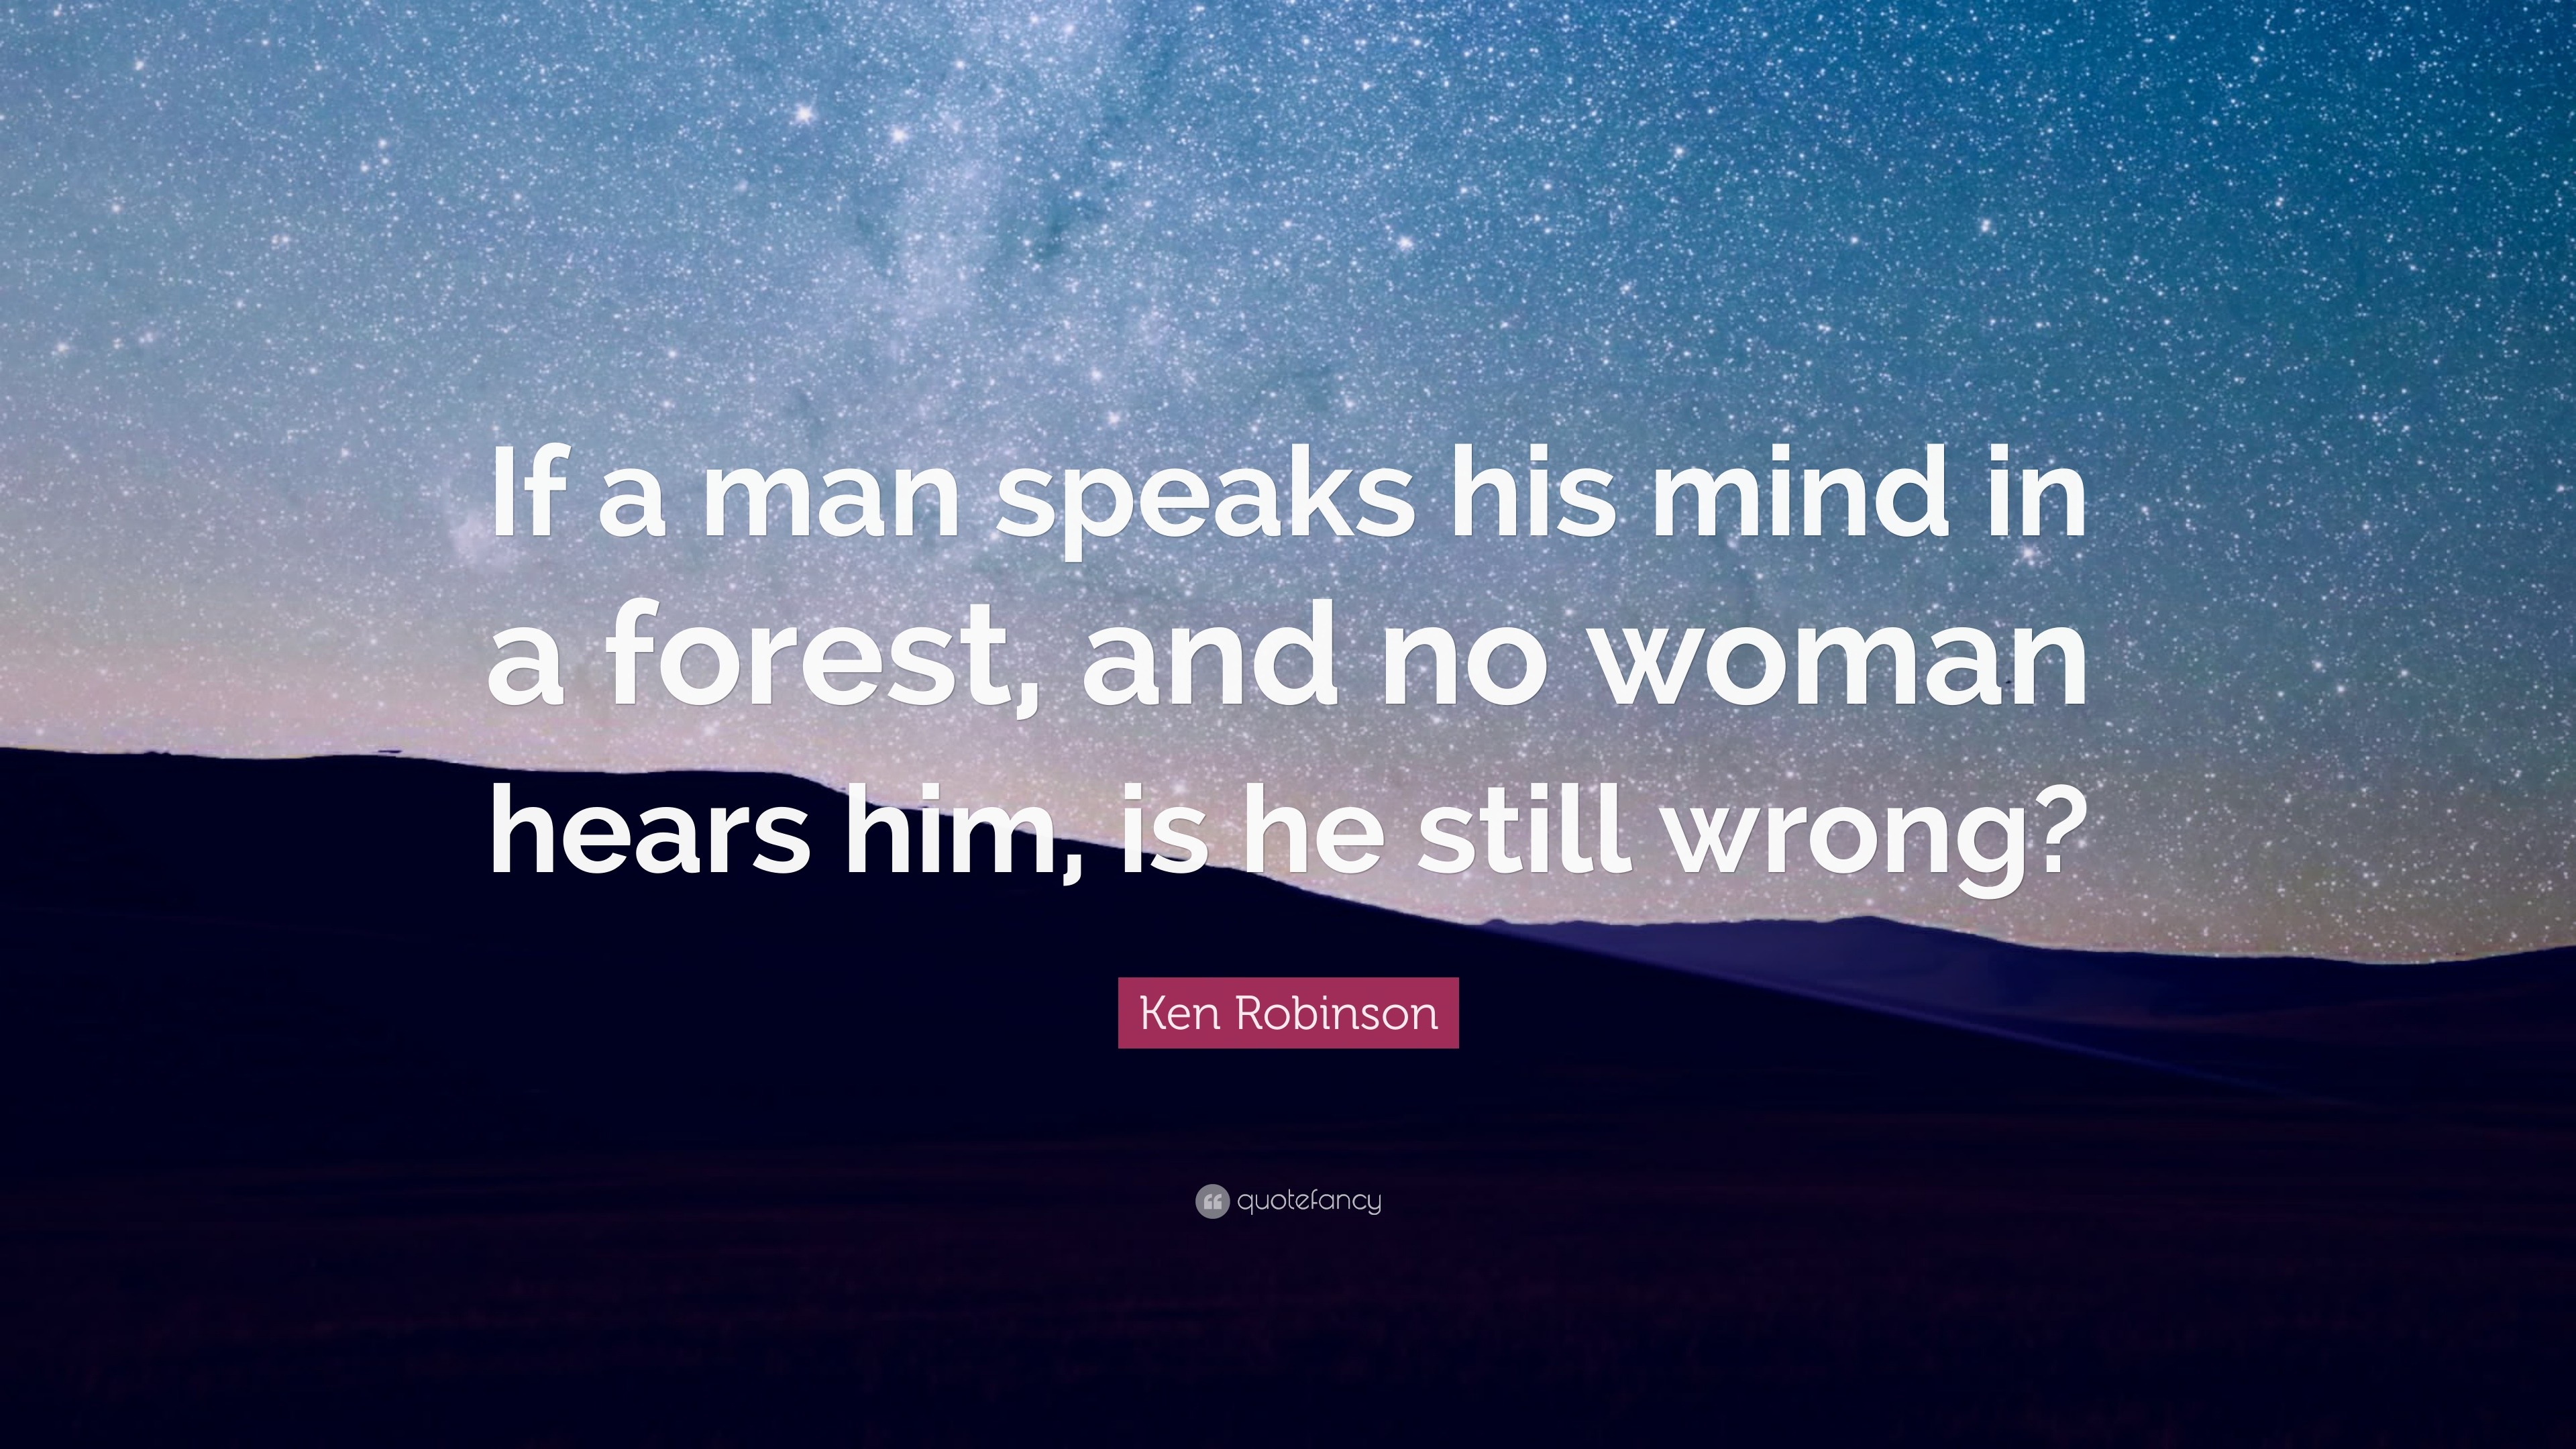 7 x 10 Aluminum If A Man Speaks In The Middle Of A Forest And There Is No Woman Around Is He Still Wrong Funny Sign By SmartSign 